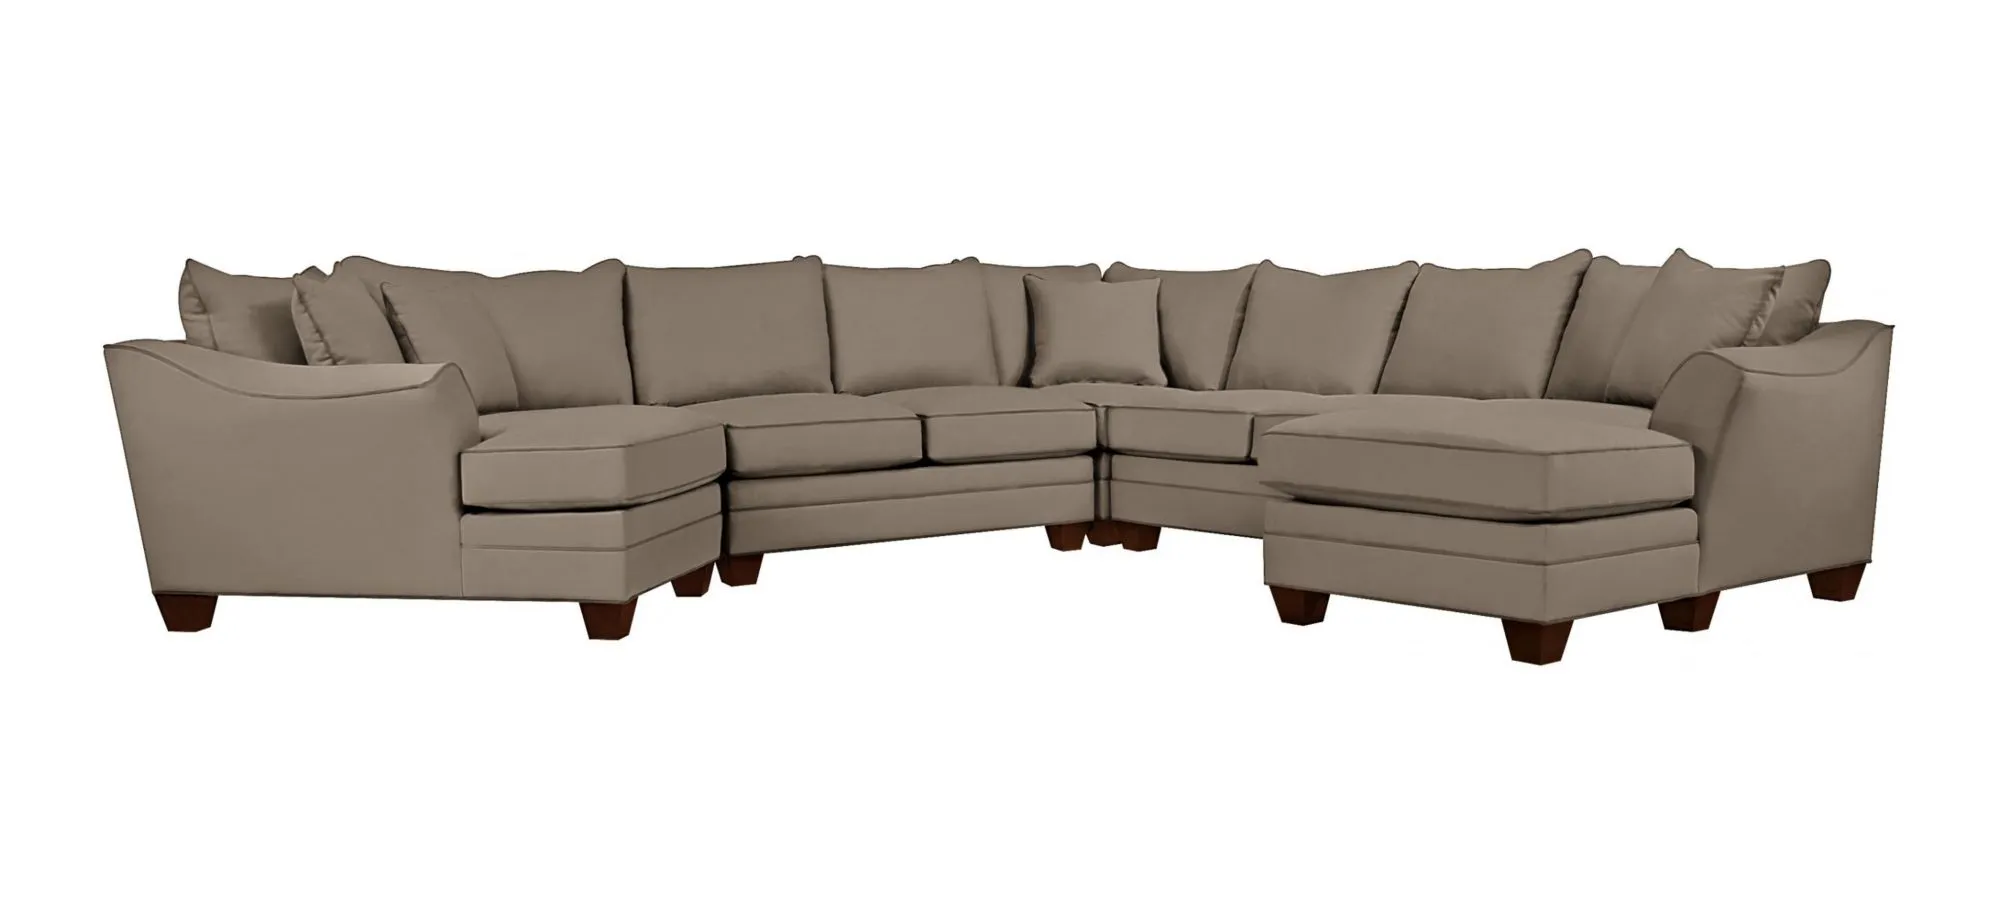 Foresthill 5-pc. Right Hand Facing Sectional Sofa in Suede So Soft Mineral by H.M. Richards